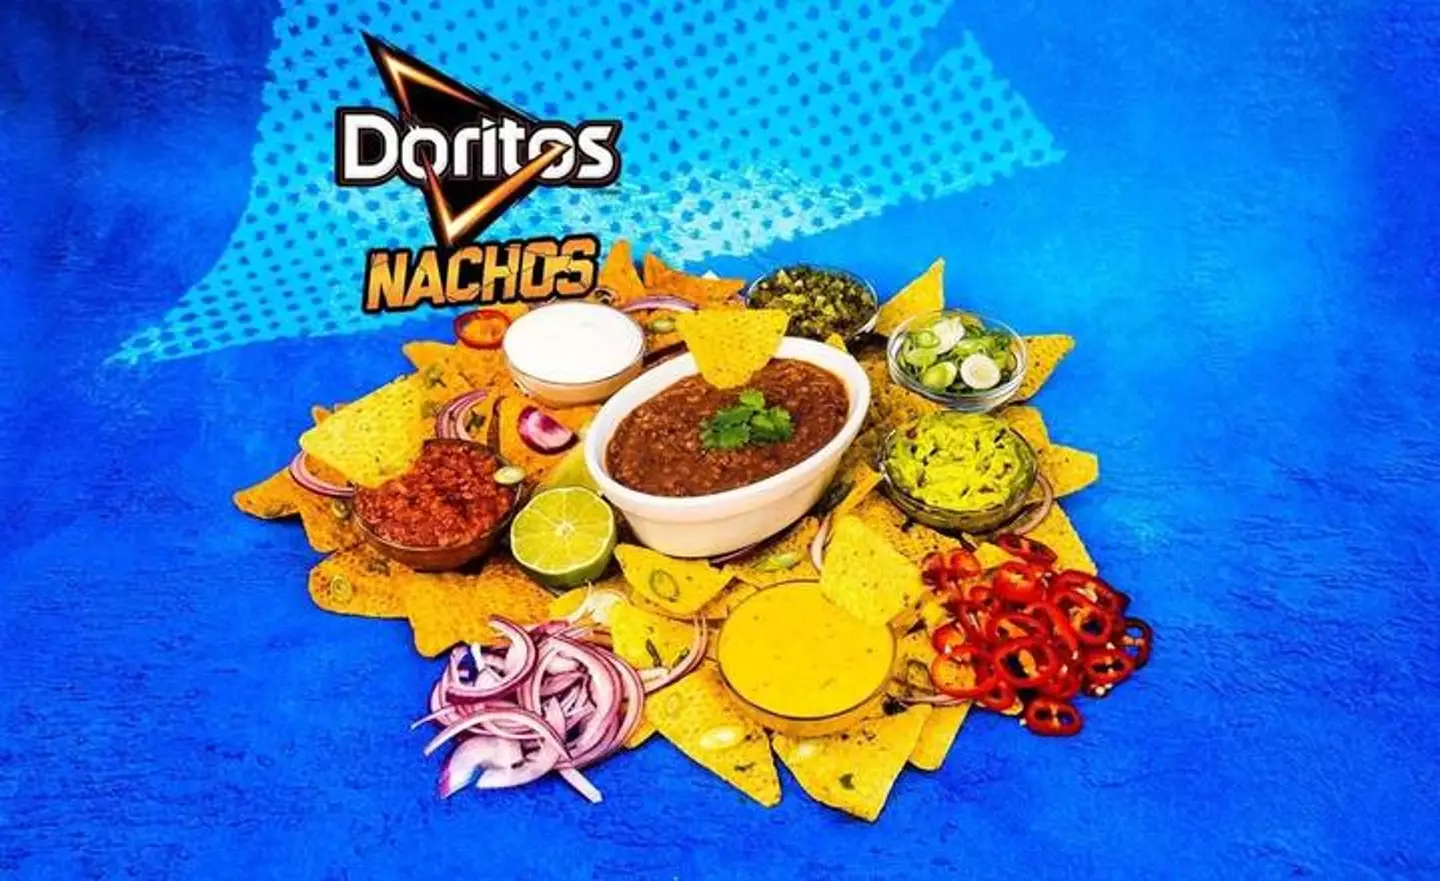 You can also freestyle your flavours and textures using the 'Make Your Play' nachos (